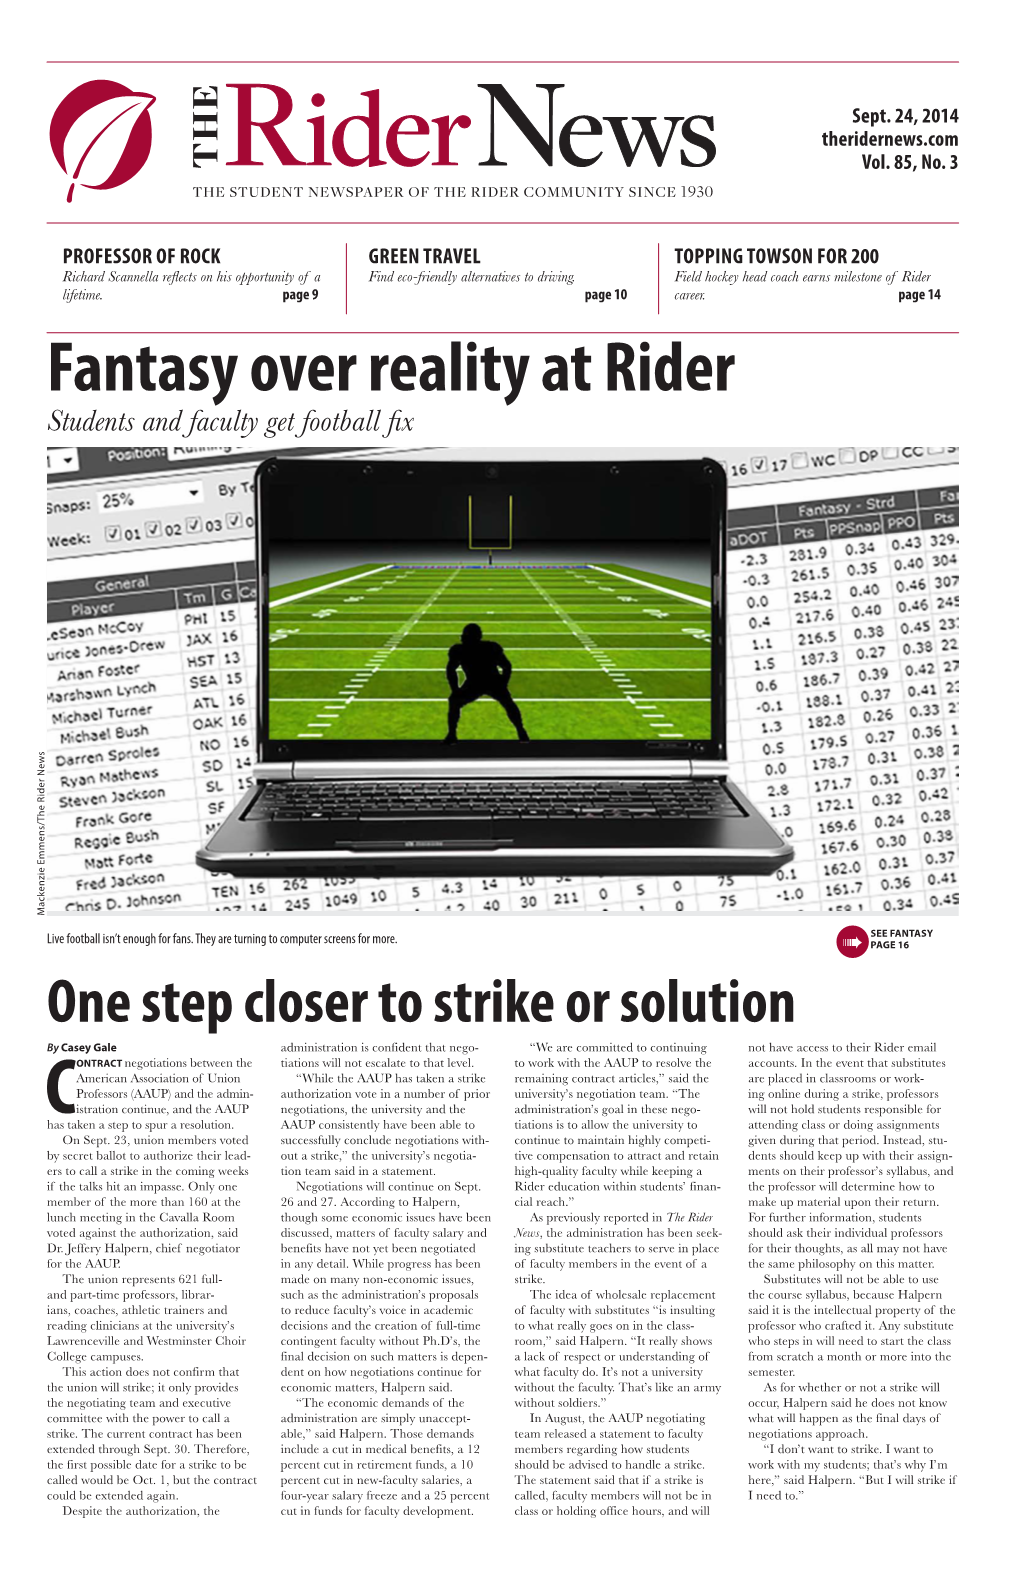 Fantasy Over Reality at Rider Students and Faculty Get Football Fix Mackenzie Emmens/The Ridermackenzie Emmens/The News